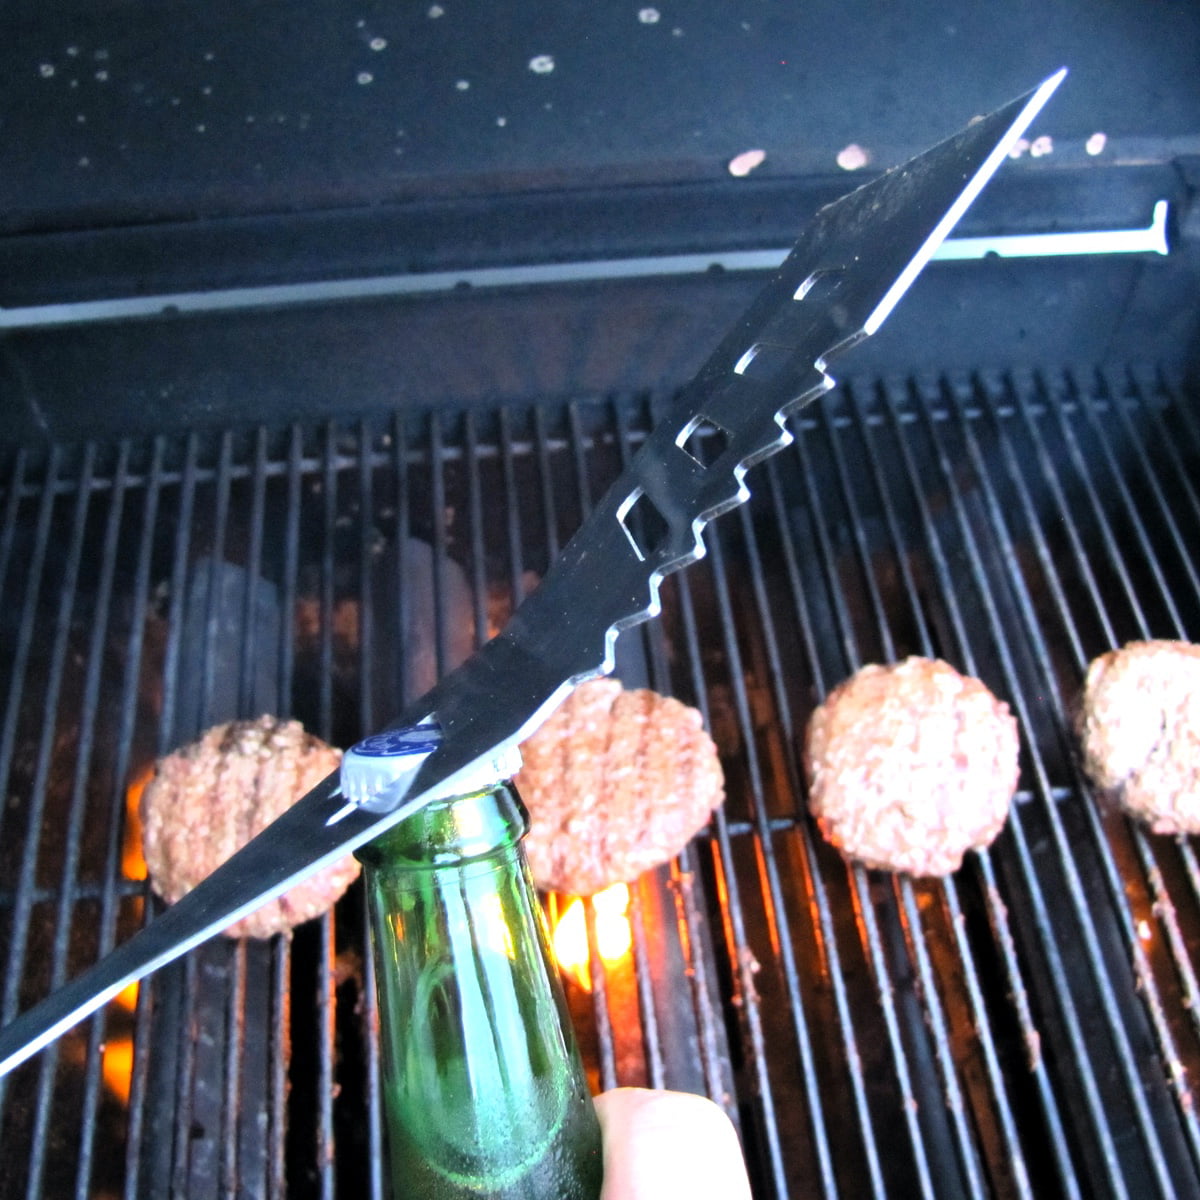 GrillToolZ: Spatula - Burger Flipper, Grilling Tool, Grate Lifter, Bottle Opener - Made in USA